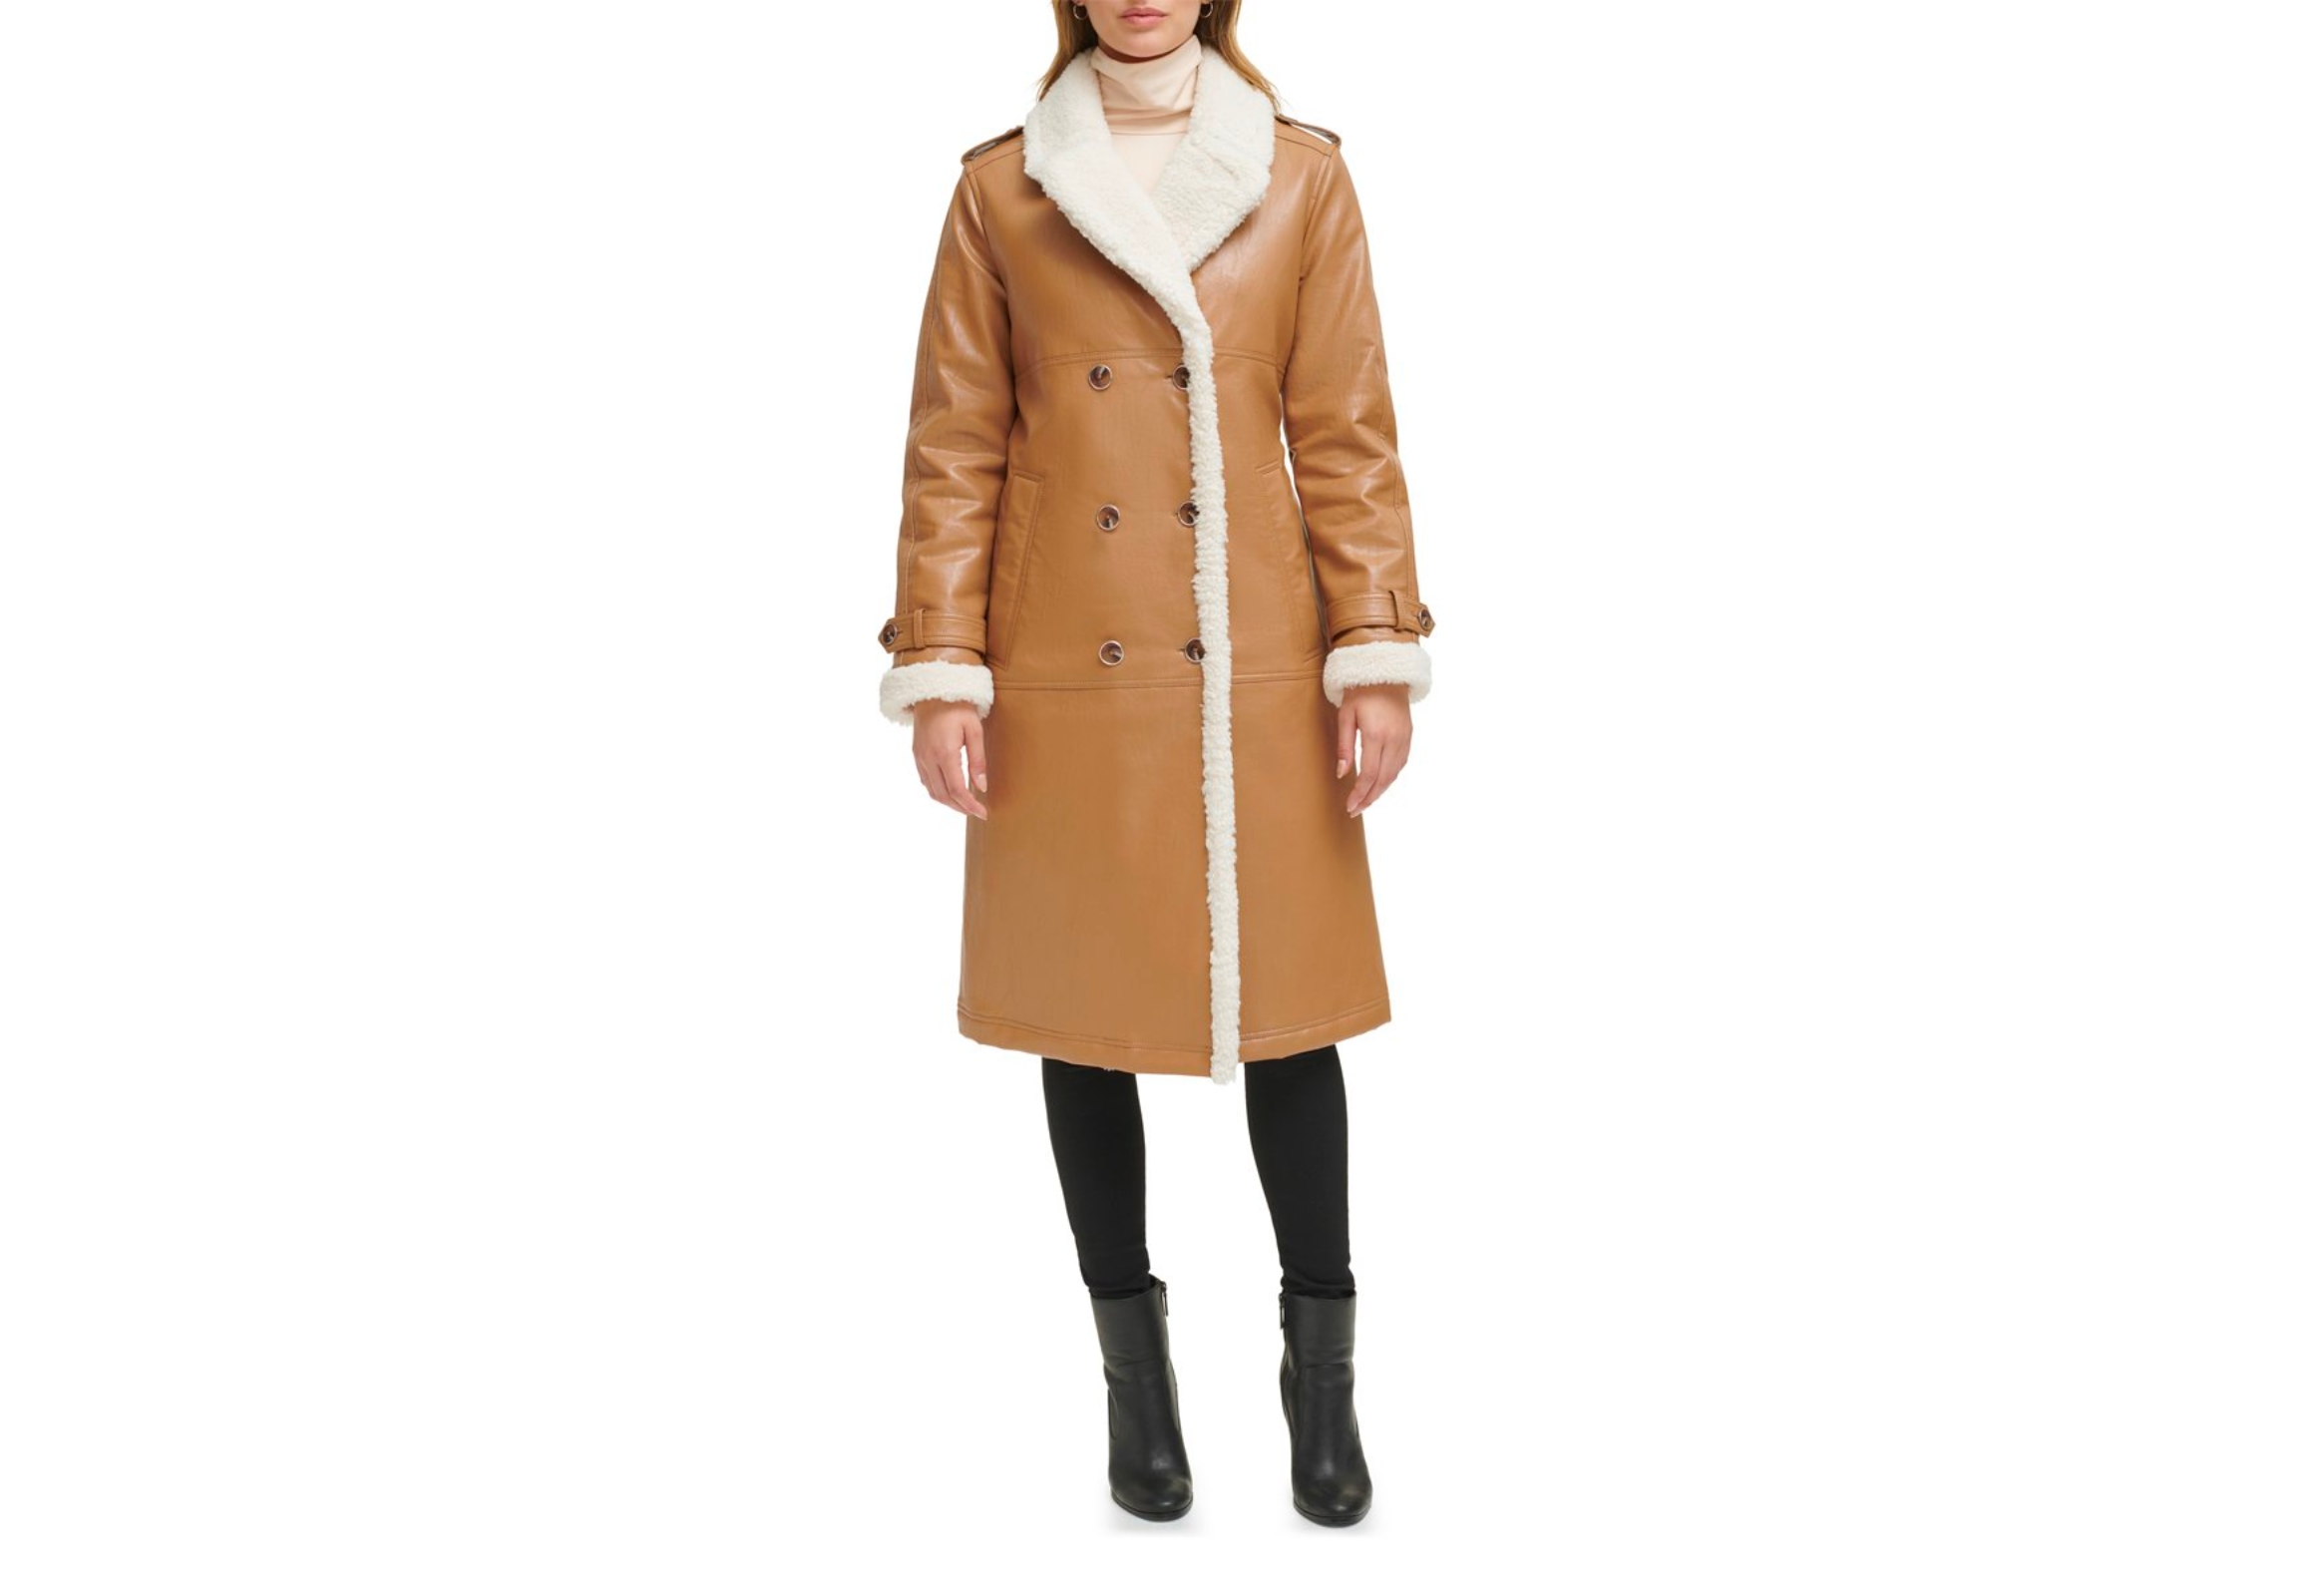 Kenneth Cole Women's Faux Leather Fur Peacoat